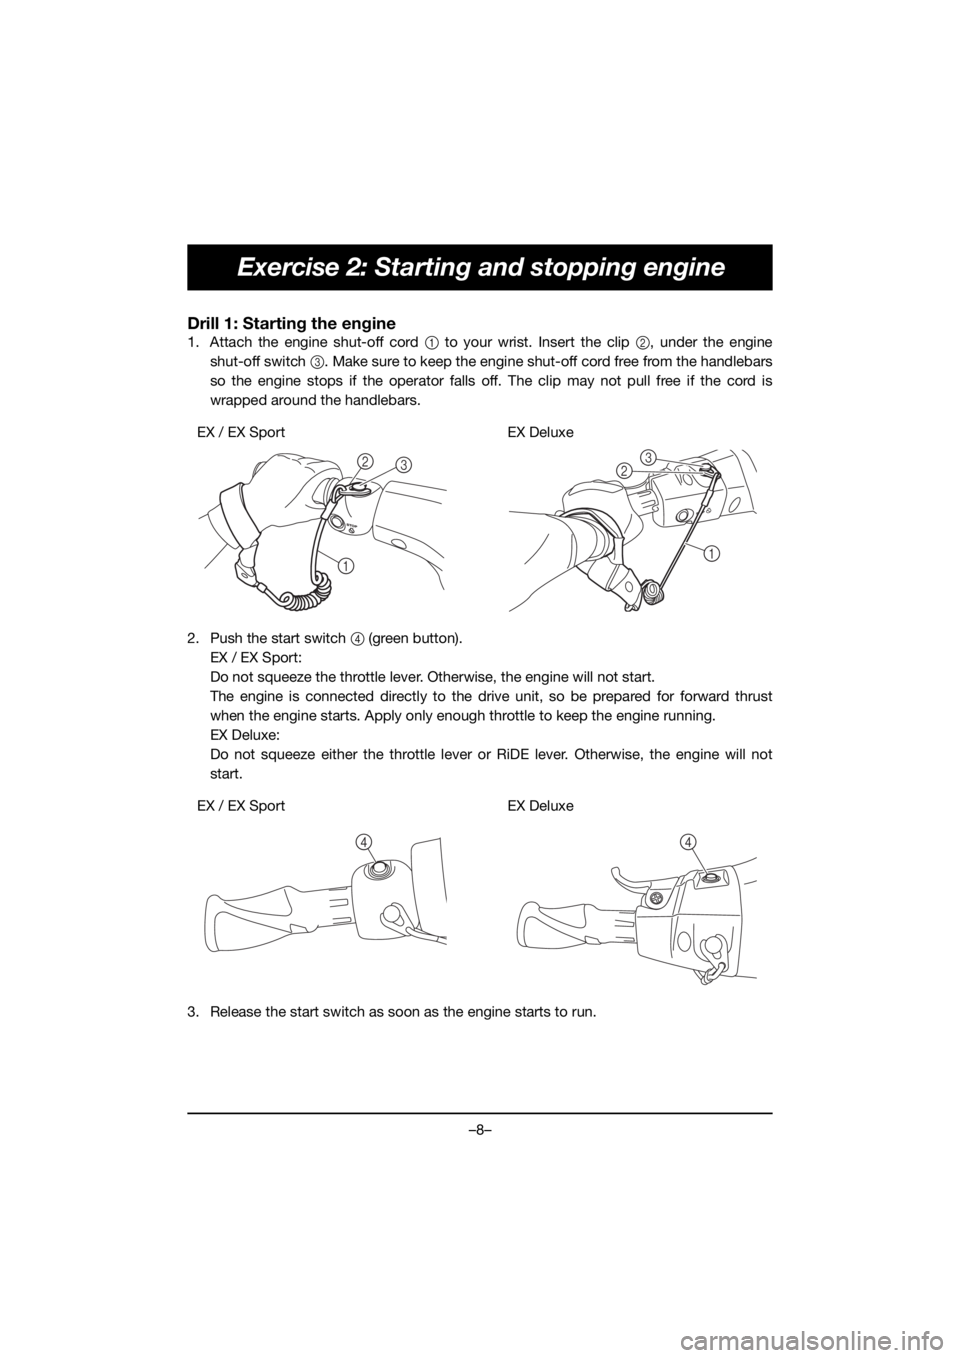 YAMAHA EX SPORT 2019  Manuale de Empleo (in Spanish) –8–
Exercise 2: Starting and stopping engine
Drill 1: Starting the engine
1. Attach the engine shut-off cord 1 to your wrist. Insert the clip 2, under the engine
shut-off switch 3. Make sure to ke